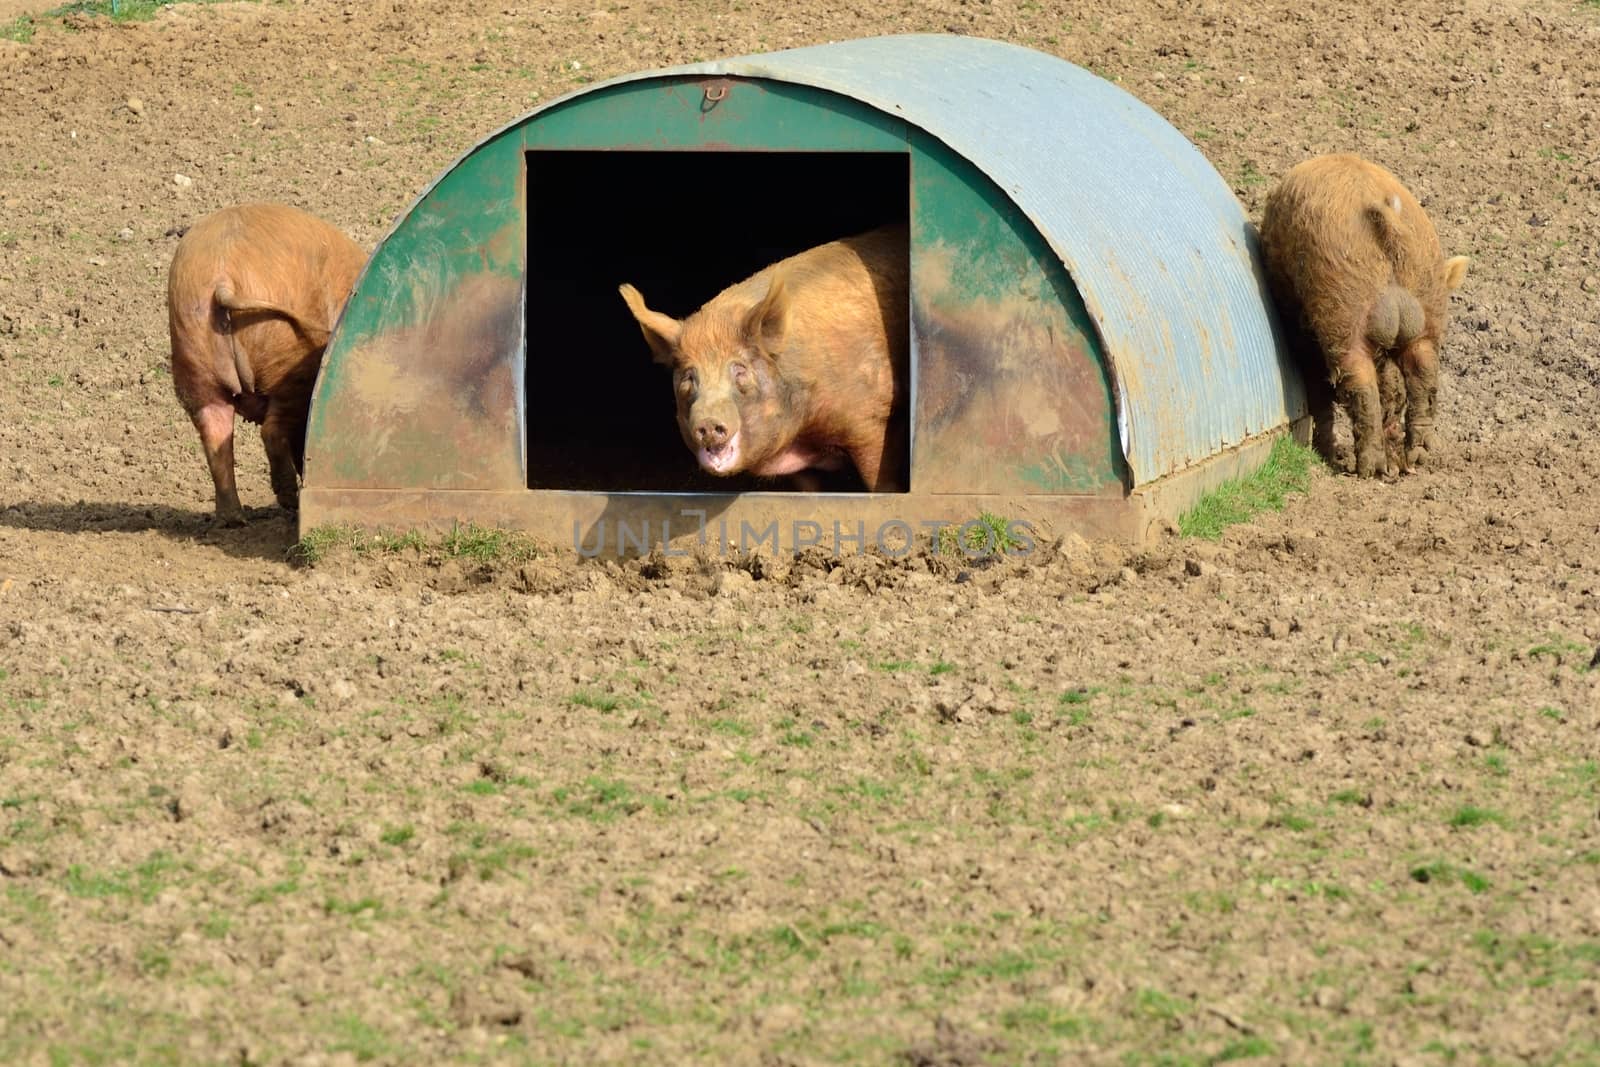 pigs in their home by pauws99